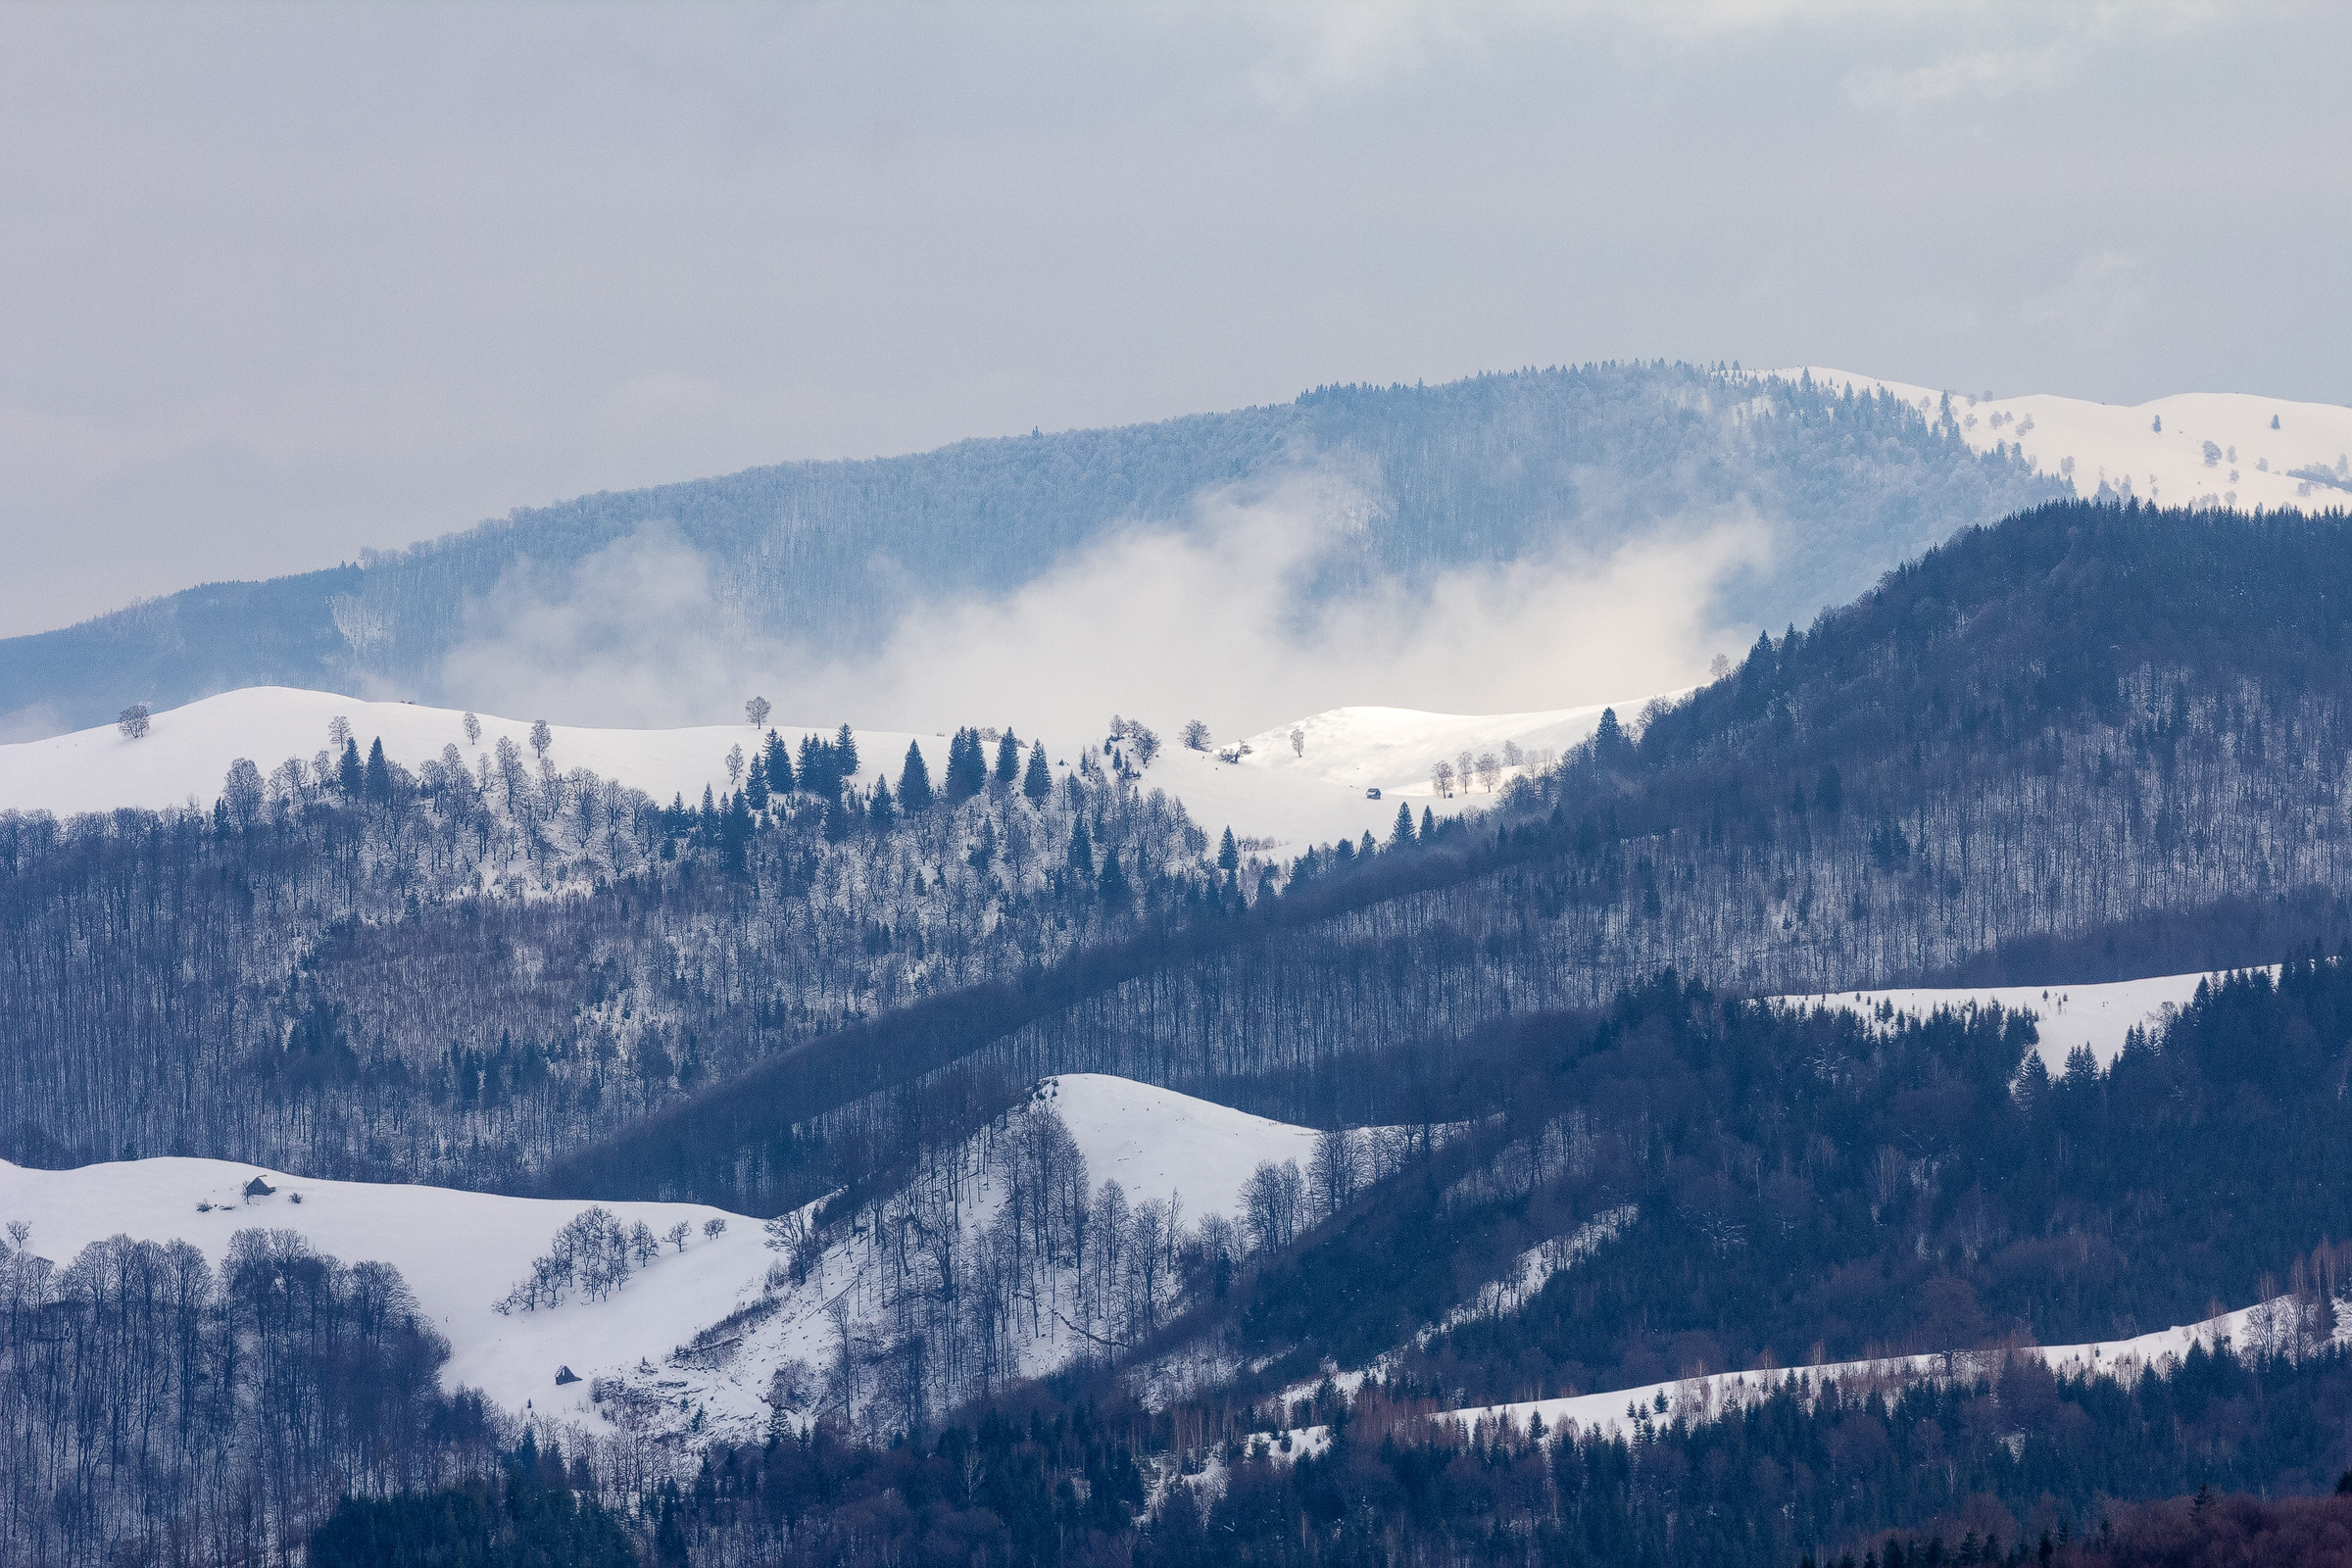 Mountain landscape in winter with small barns dotting the forested ridges